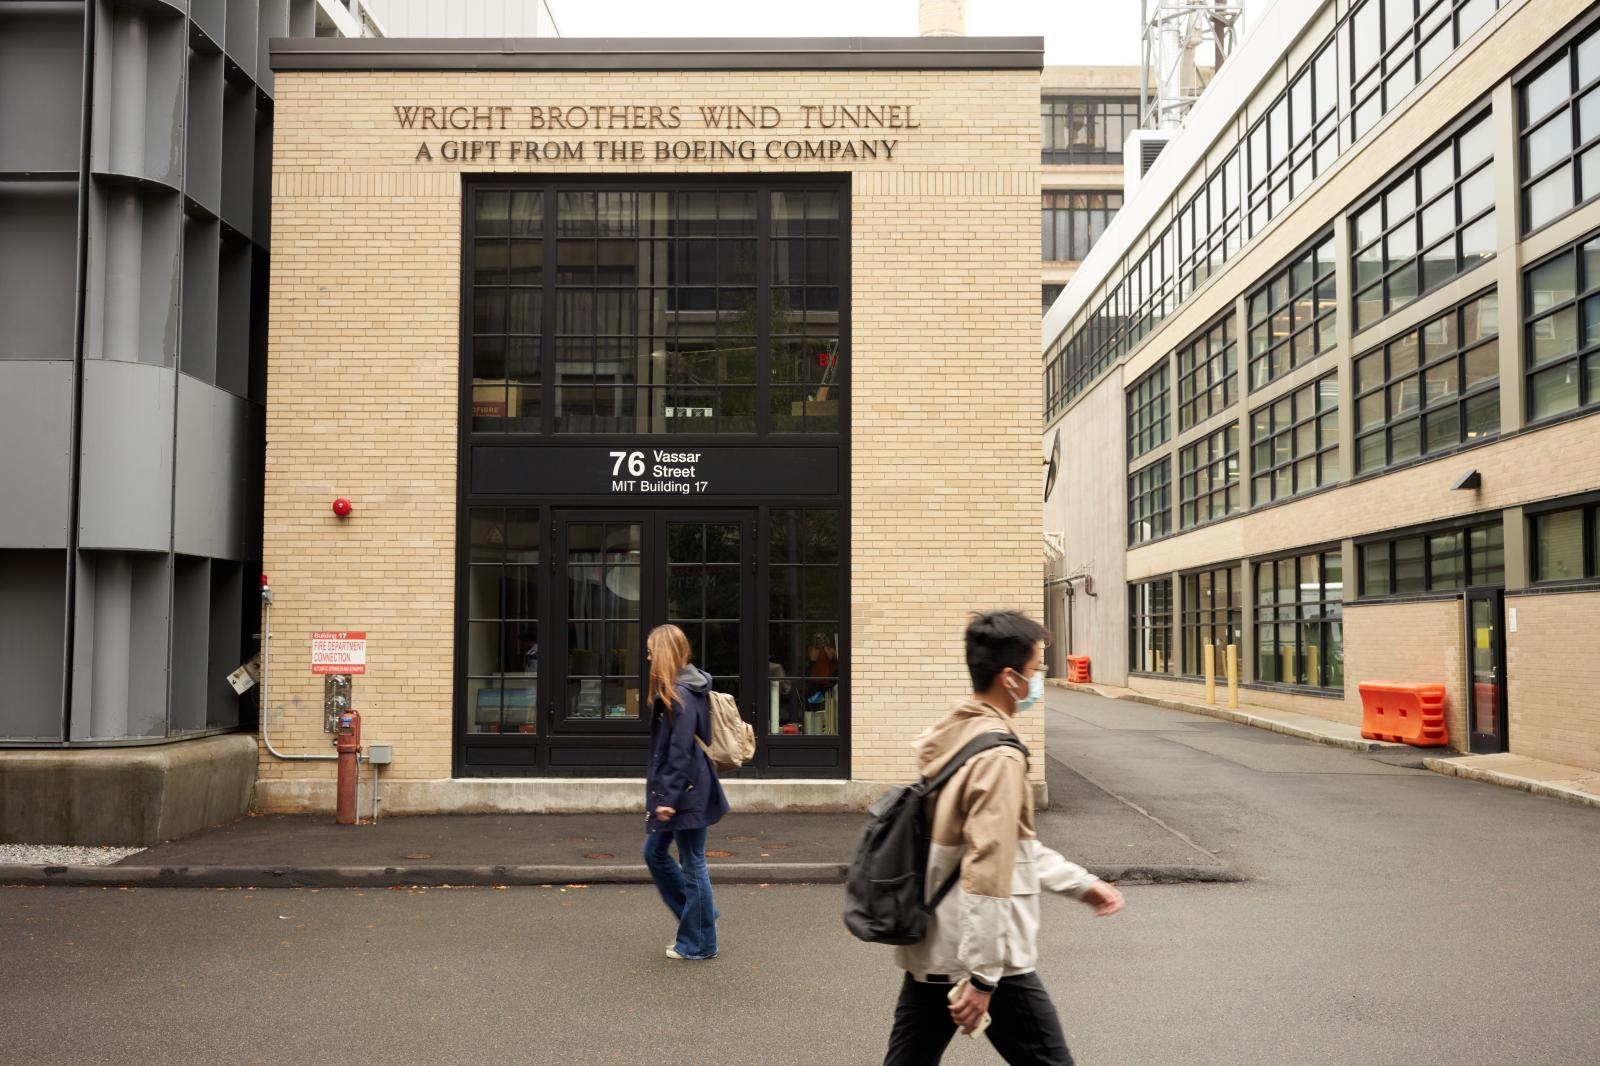 The Wright Brothers Wind Tunnel / Overview of MIT / The Massachusetts Institute of Technology